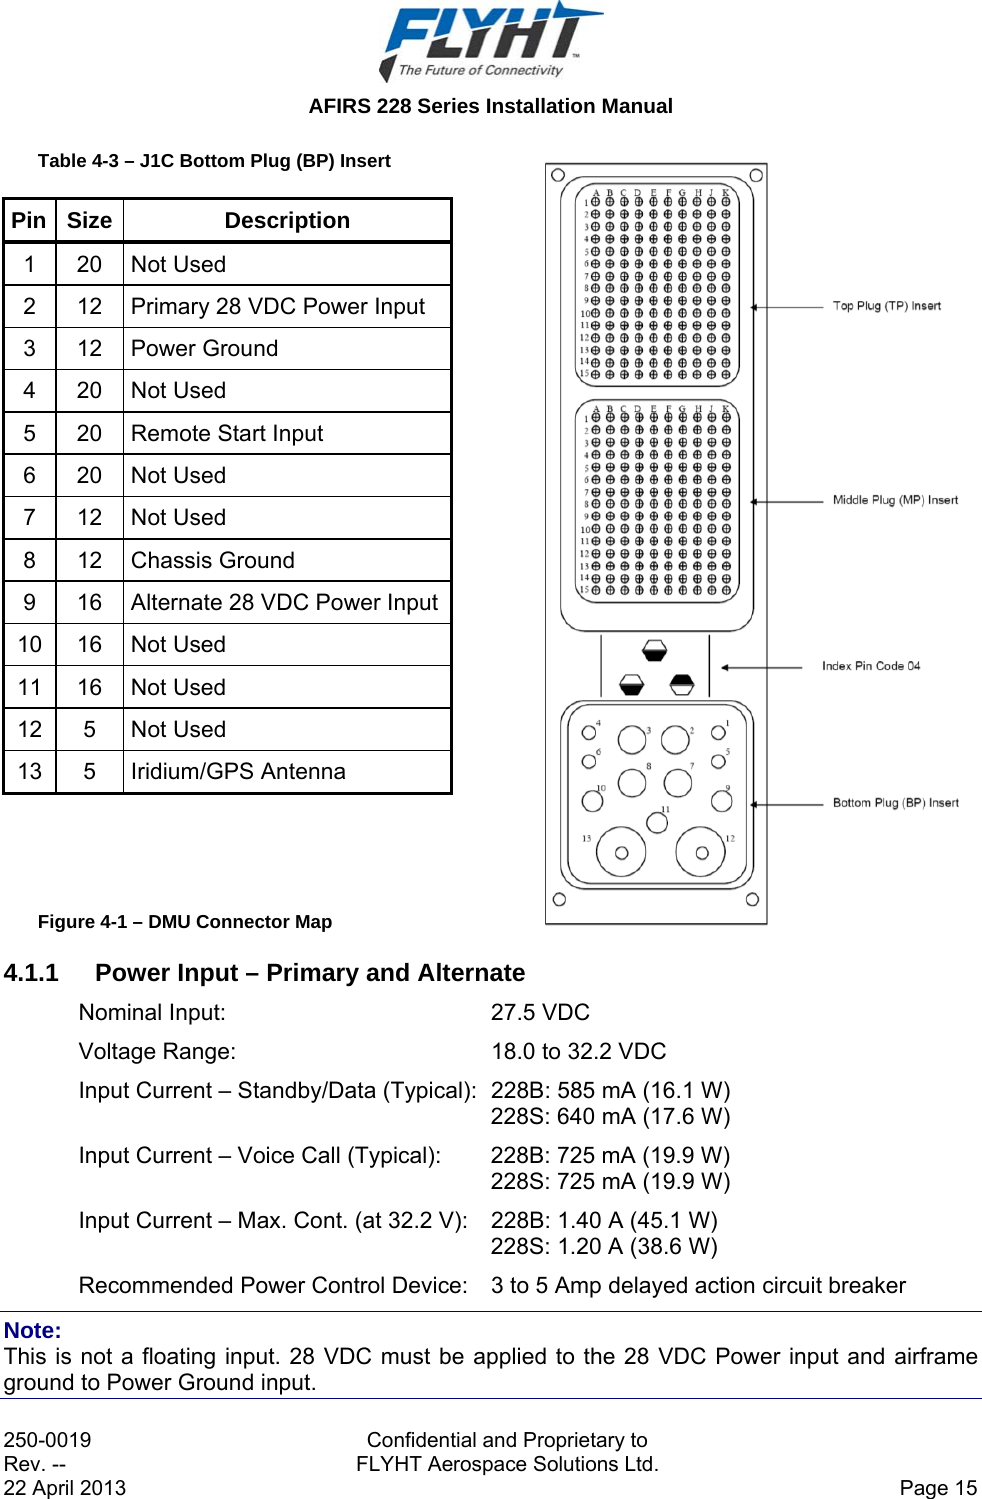  AFIRS 228 Series Installation Manual 250-0019  Confidential and Proprietary to Rev. --  FLYHT Aerospace Solutions Ltd. 22 April 2013    Page 15 Table 4-3 – J1C Bottom Plug (BP) Insert Pin Size  Description 1 20 Not Used 2  12  Primary 28 VDC Power Input 3 12 Power Ground 4 20 Not Used 5  20  Remote Start Input 6 20 Not Used 7 12 Not Used 8 12 Chassis Ground 9  16  Alternate 28 VDC Power Input10 16 Not Used 11 16 Not Used 12 5 Not Used 13 5 Iridium/GPS Antenna    Figure 4-1 – DMU Connector Map 4.1.1  Power Input – Primary and Alternate Nominal Input:  27.5 VDC Voltage Range:  18.0 to 32.2 VDC Input Current – Standby/Data (Typical):  228B: 585 mA (16.1 W) 228S: 640 mA (17.6 W) Input Current – Voice Call (Typical):  228B: 725 mA (19.9 W) 228S: 725 mA (19.9 W) Input Current – Max. Cont. (at 32.2 V):  228B: 1.40 A (45.1 W) 228S: 1.20 A (38.6 W) Recommended Power Control Device:  3 to 5 Amp delayed action circuit breaker Note:  This is not a floating input. 28 VDC must be applied to the 28 VDC Power input and airframe ground to Power Ground input. 